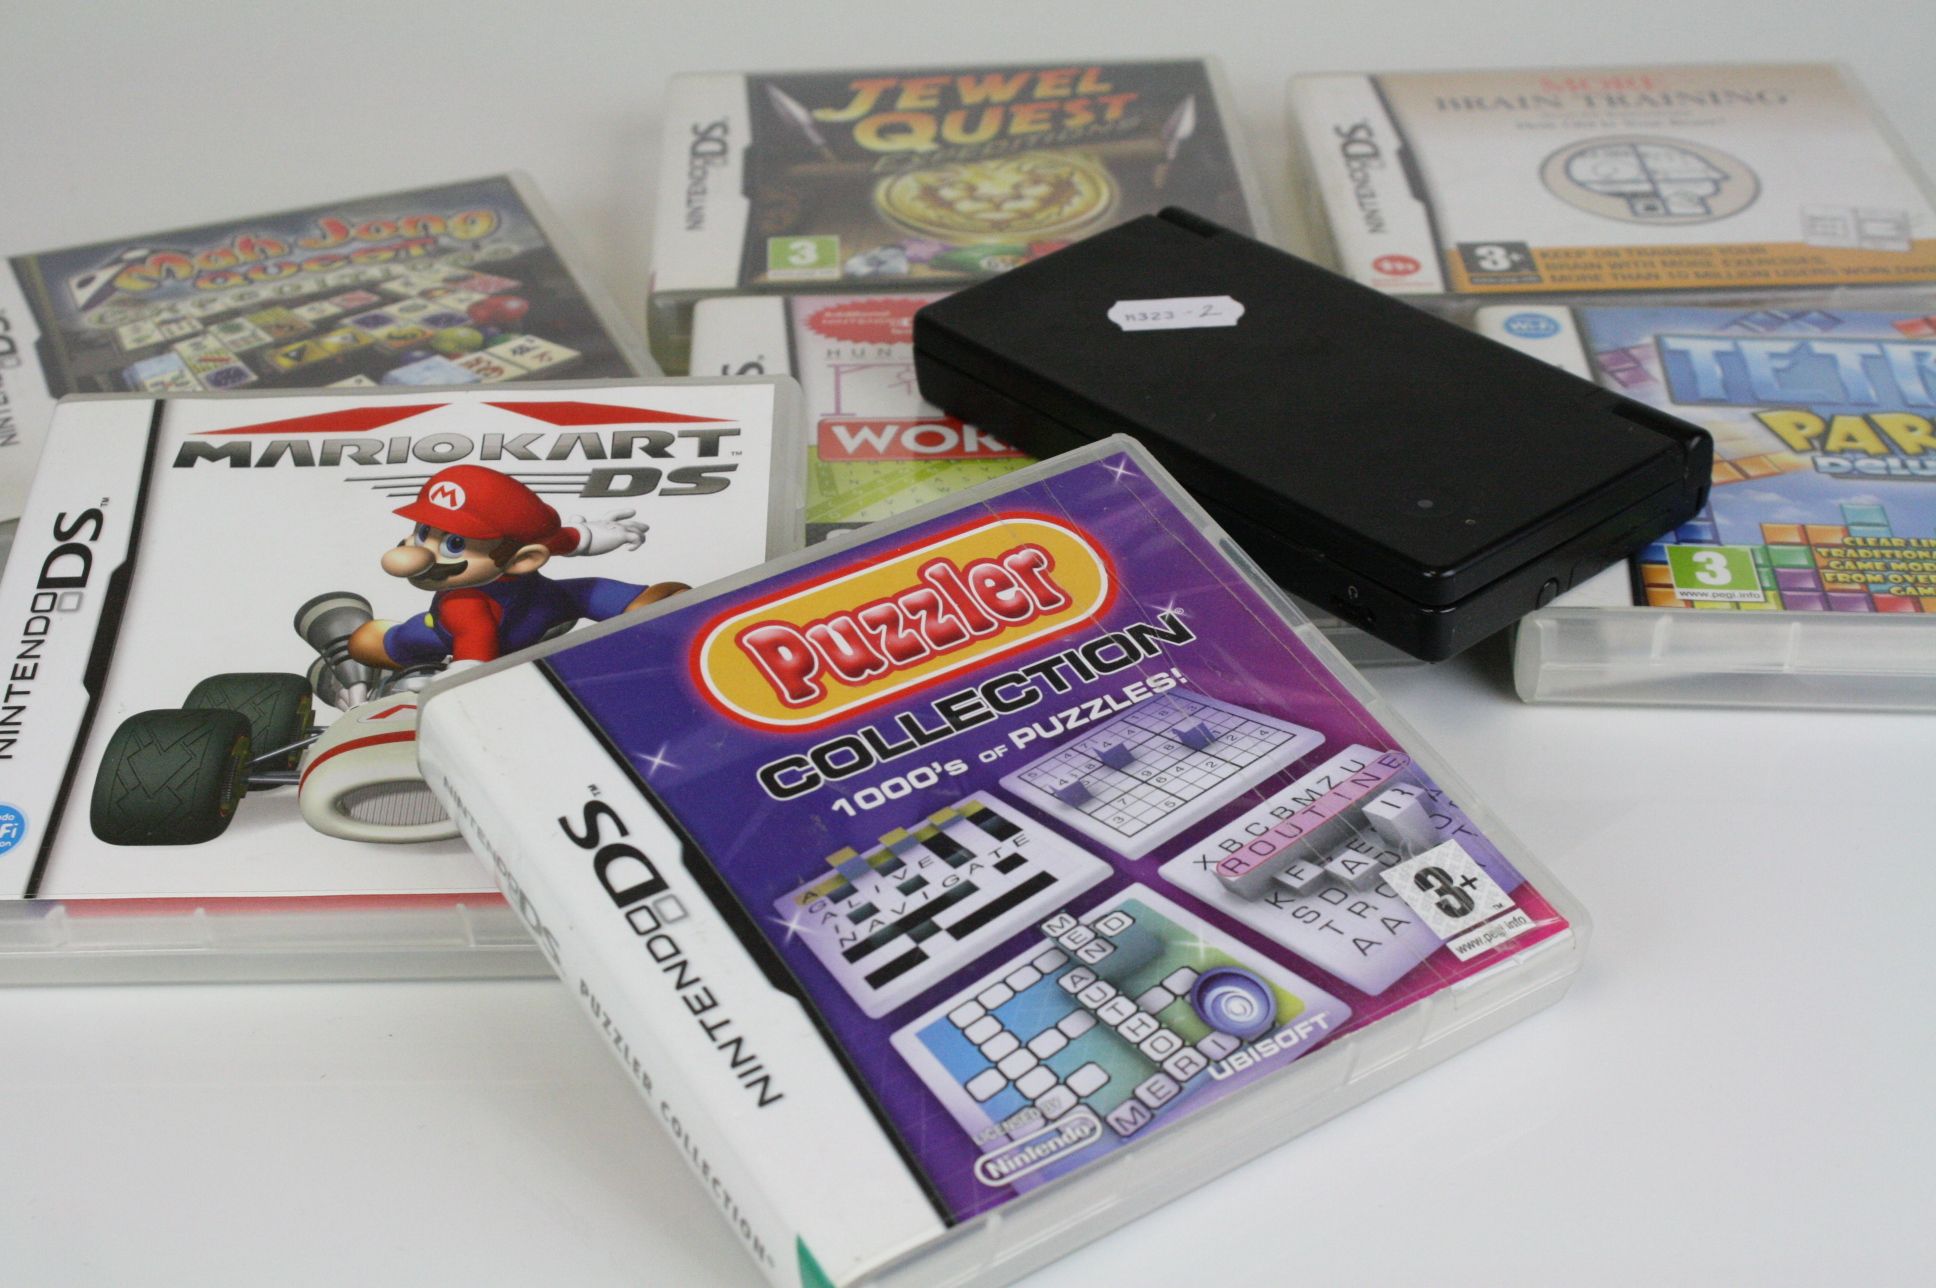 A Nintendo DS handheld games console together with a selection of games. - Image 6 of 6